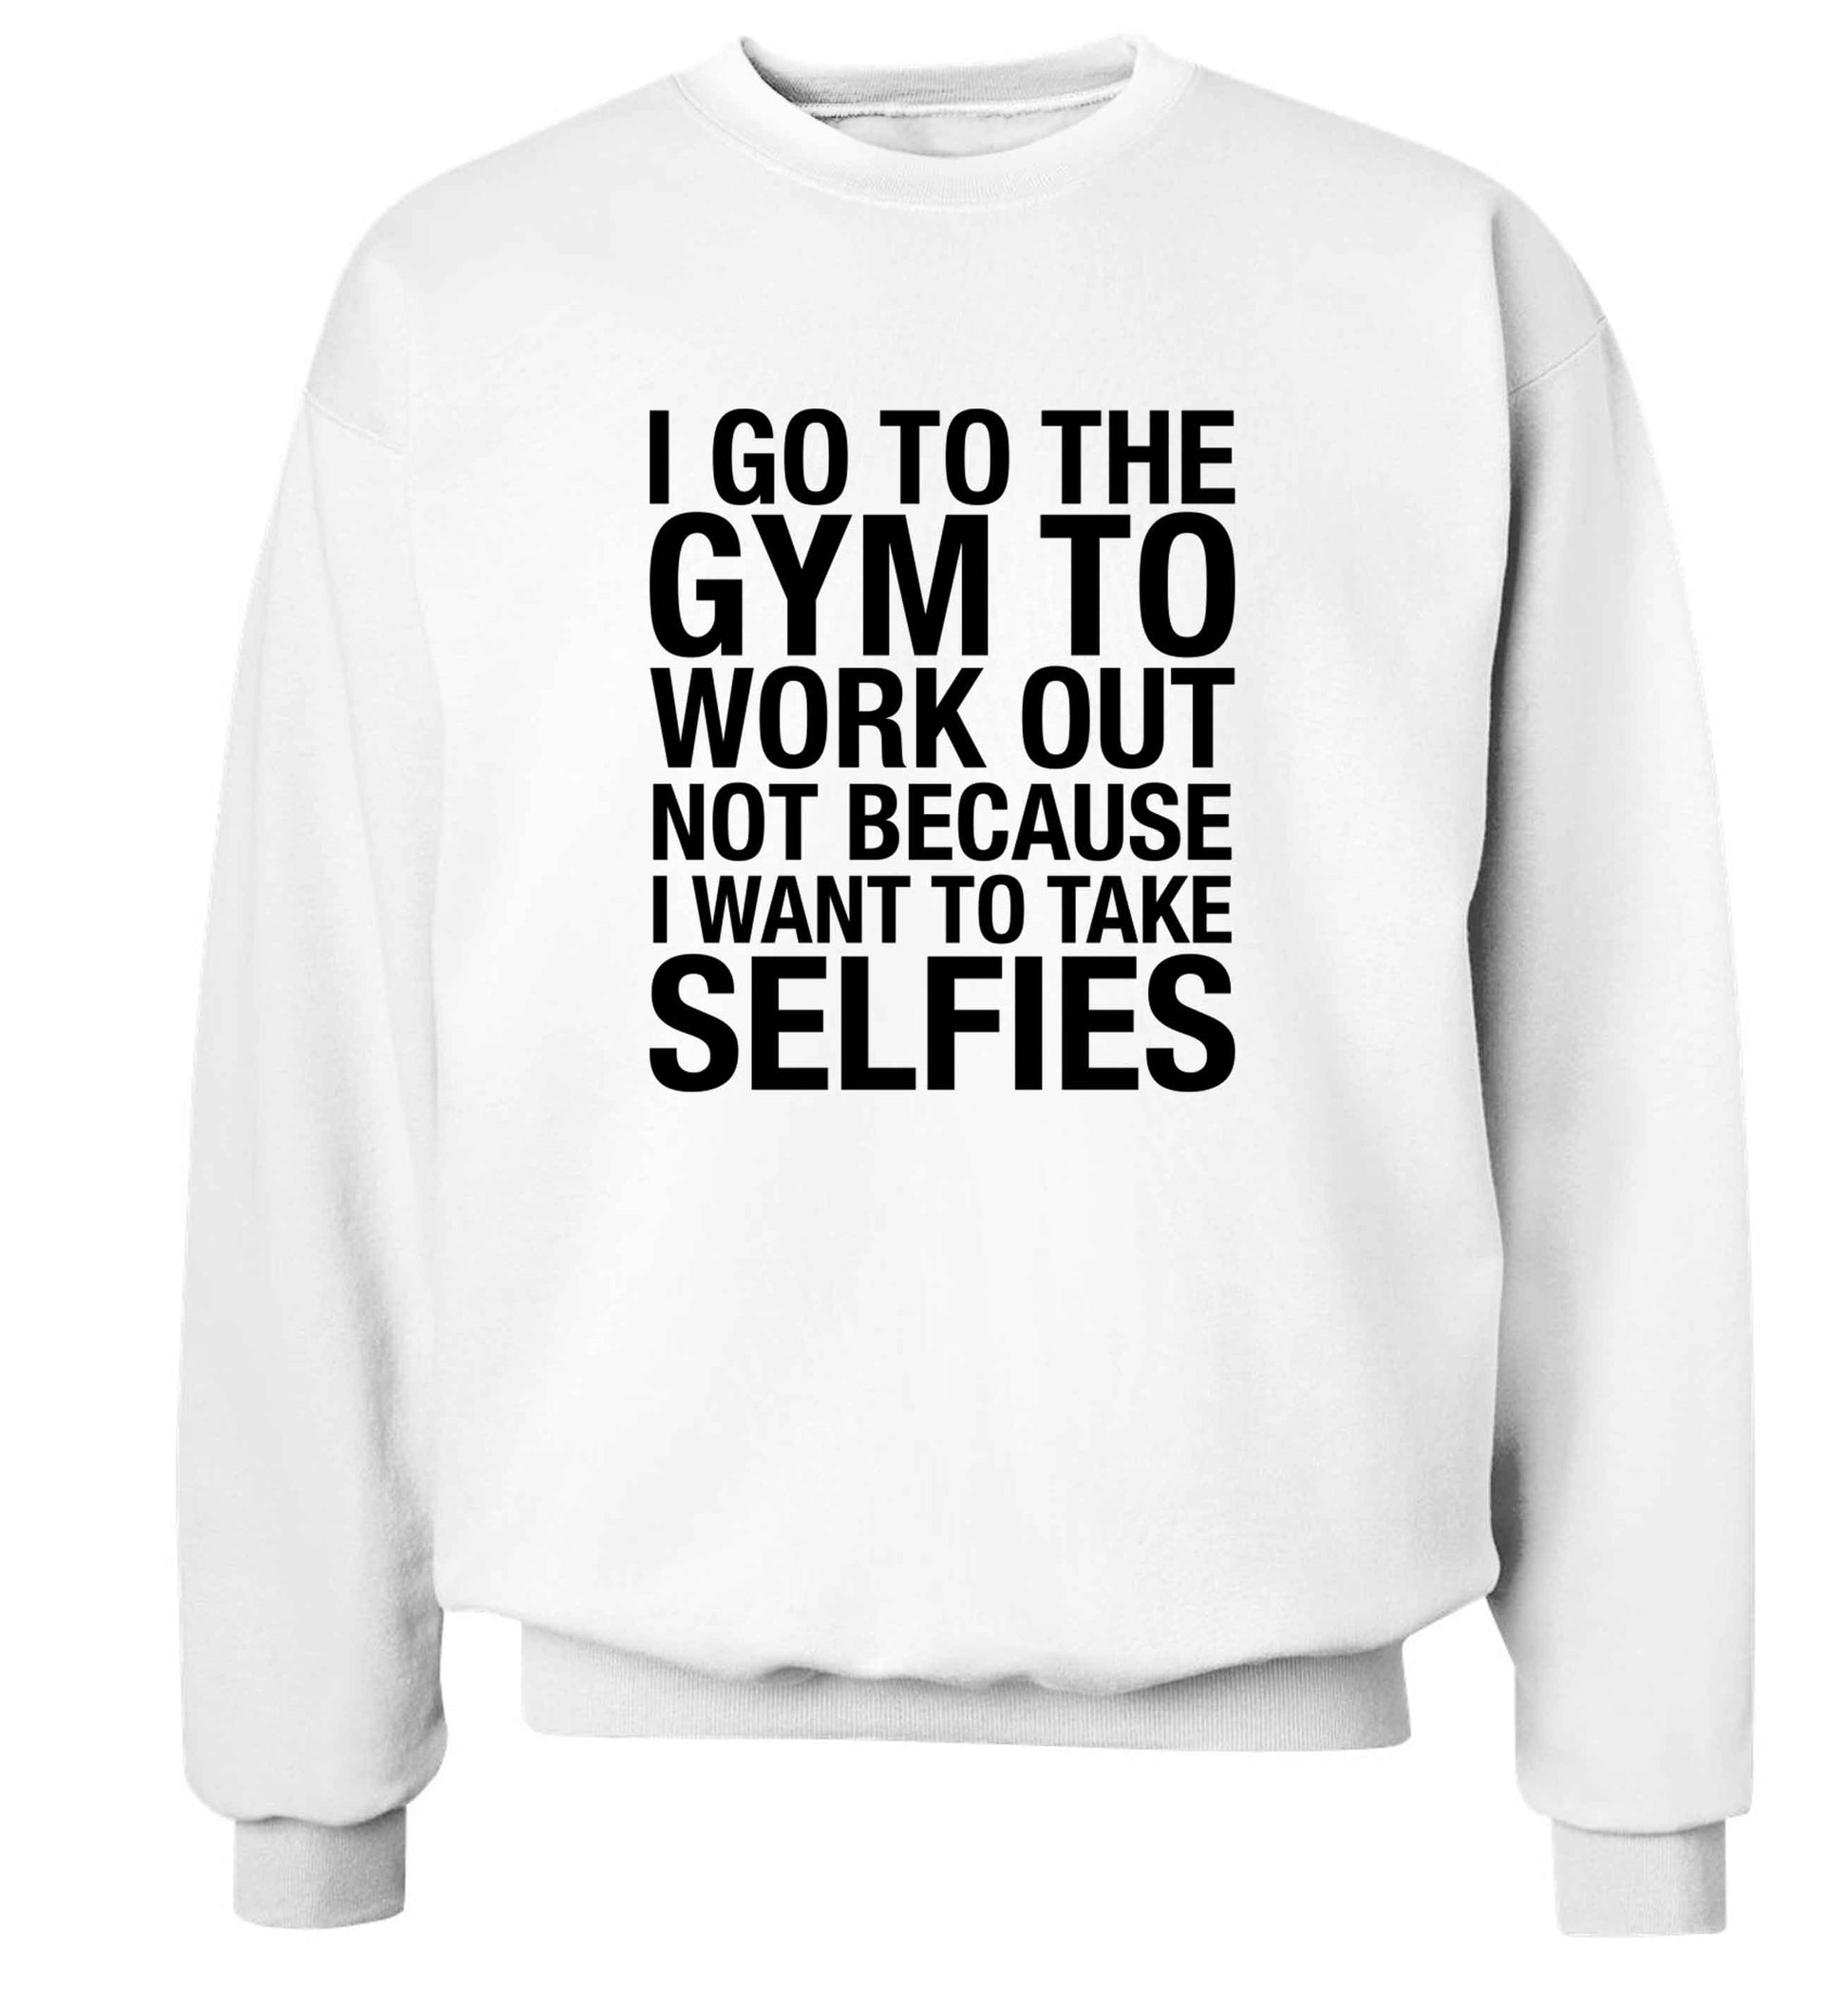 I go to the gym to workout not to take selfies adult's unisex white sweater 2XL